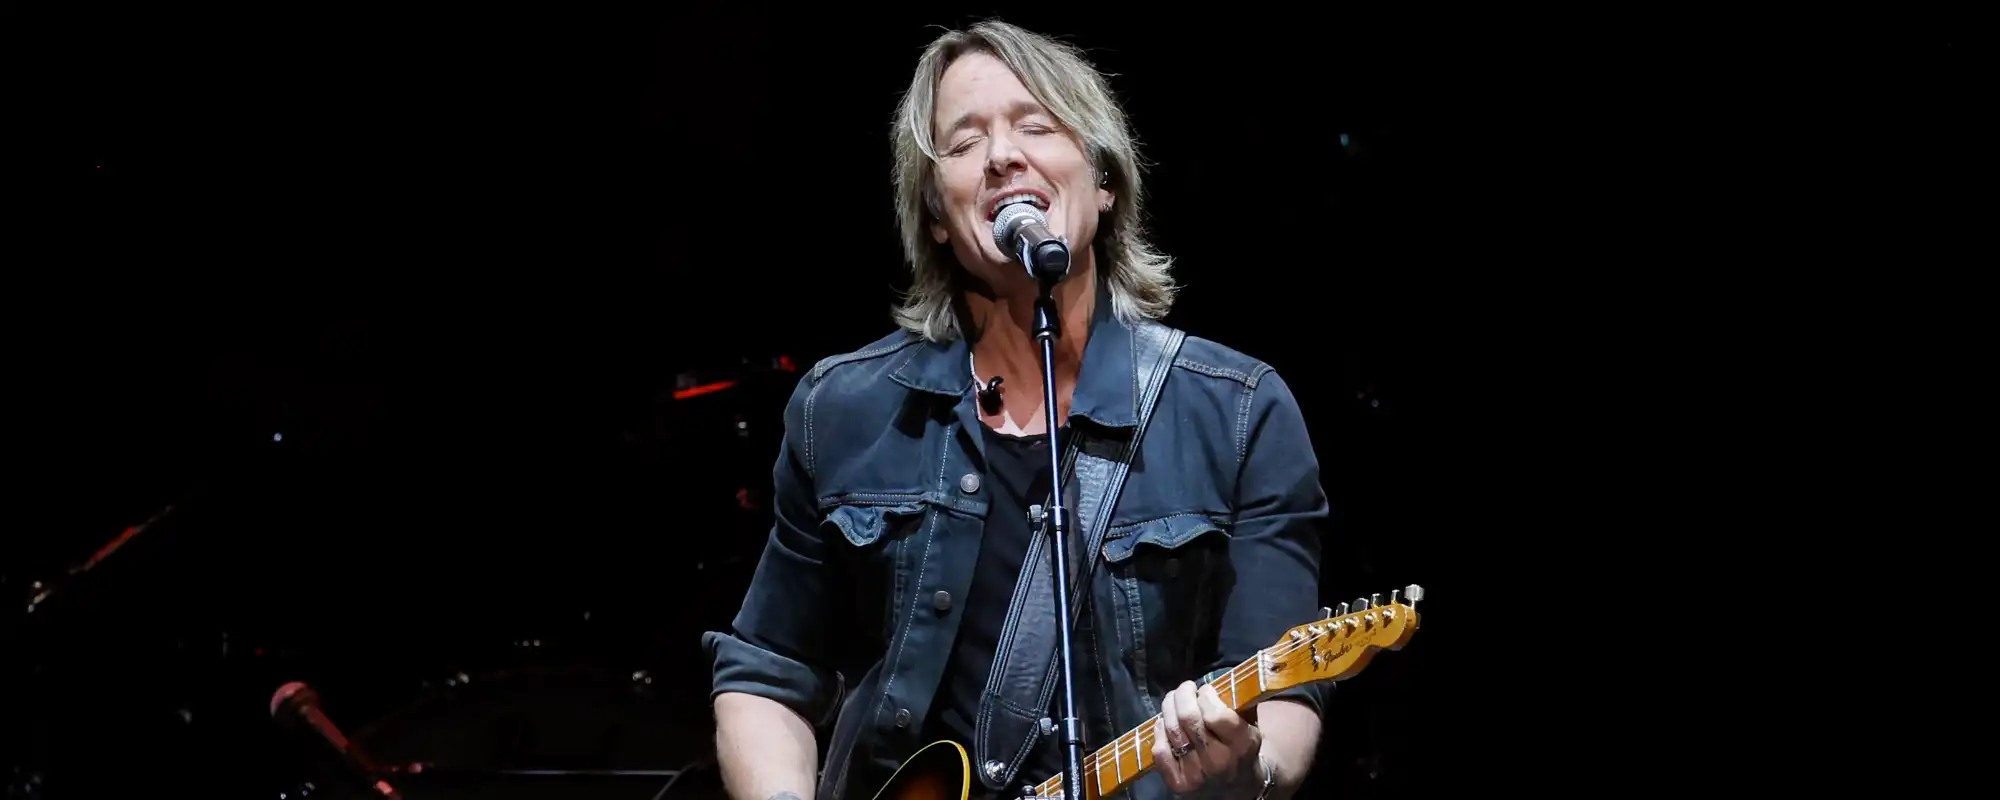 Keith Urban Brings 2016 Hit Blue Aint Your Color to The Voice Season 24 Finale